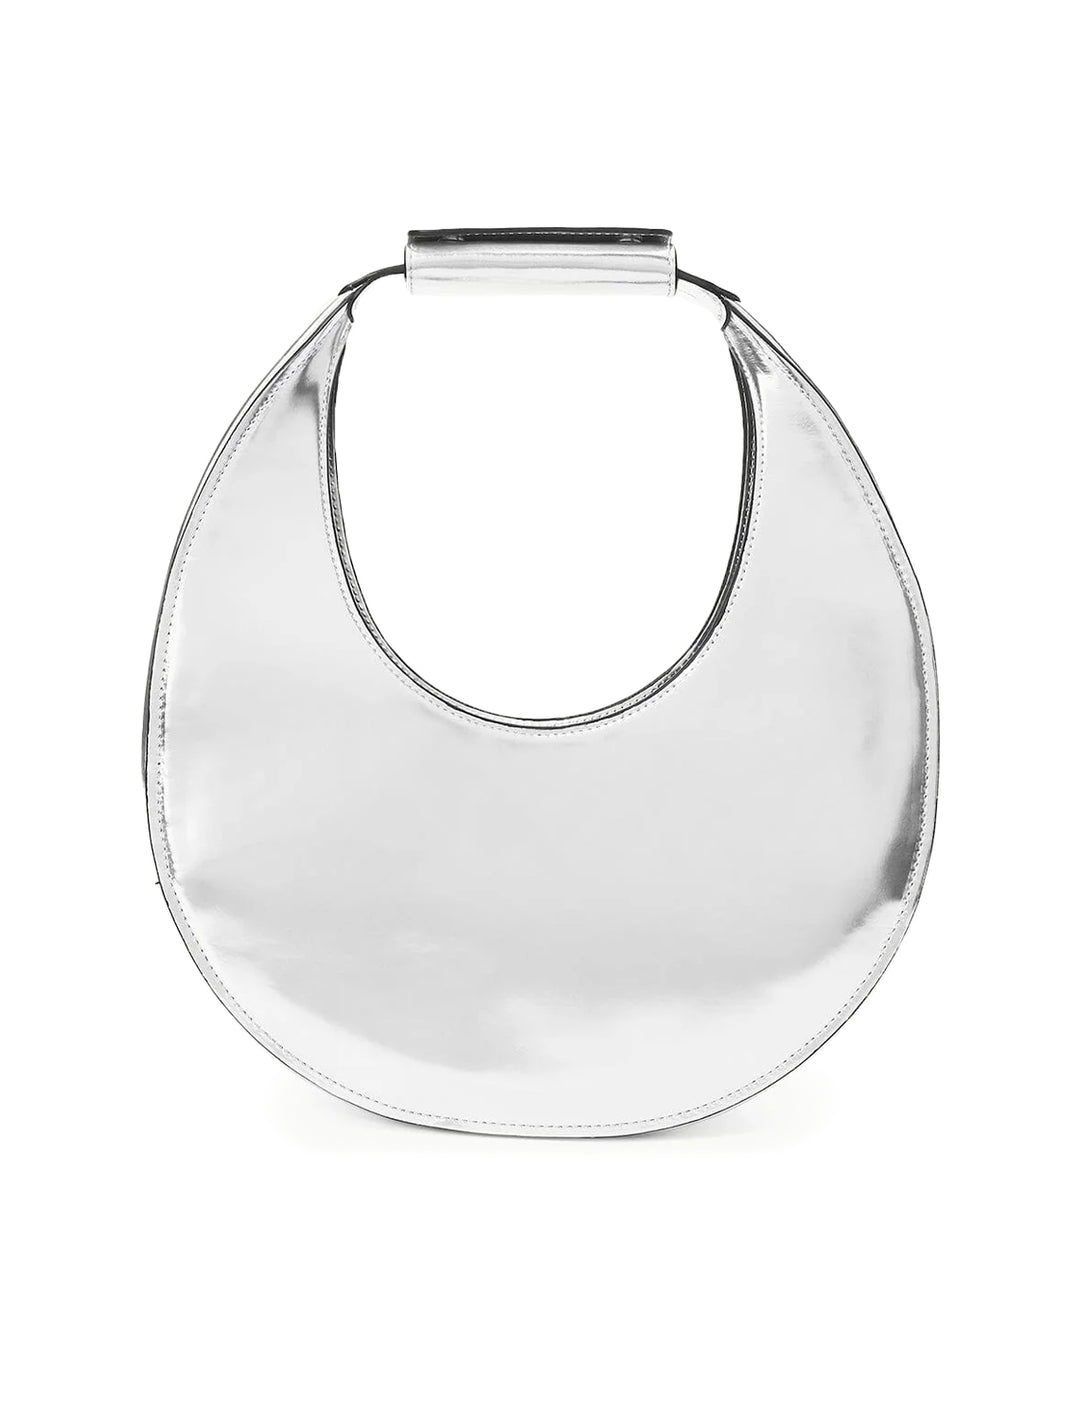 Front view of STAUD's moon tote bag in chrome.